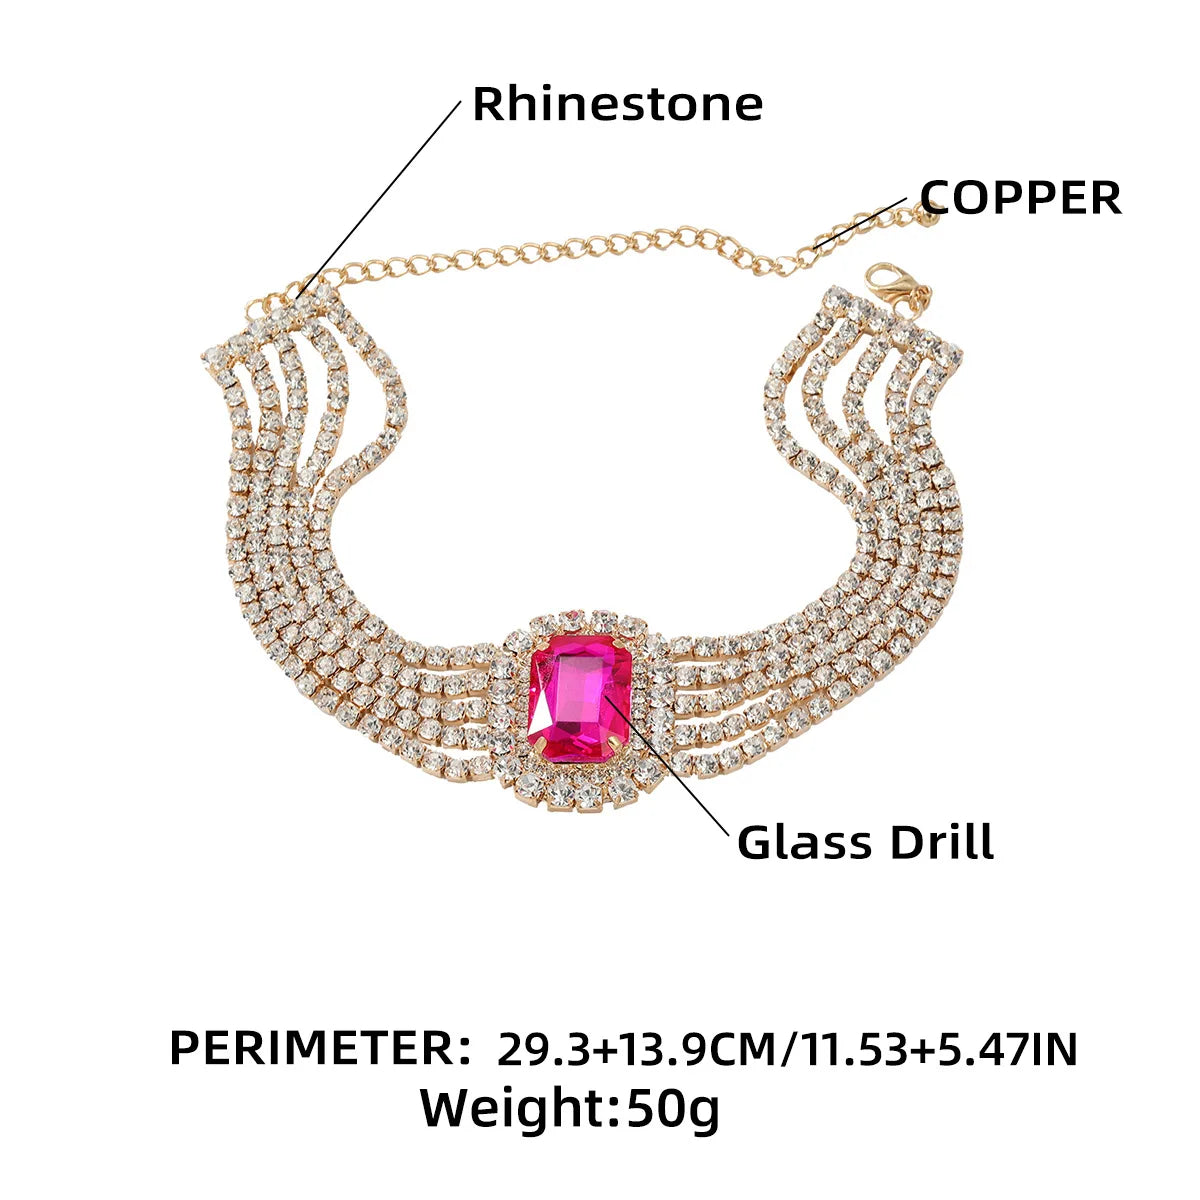 Extravagant Multicolored Rhinestone Square Pendant Necklace for Women with Crystal Hollow Chain